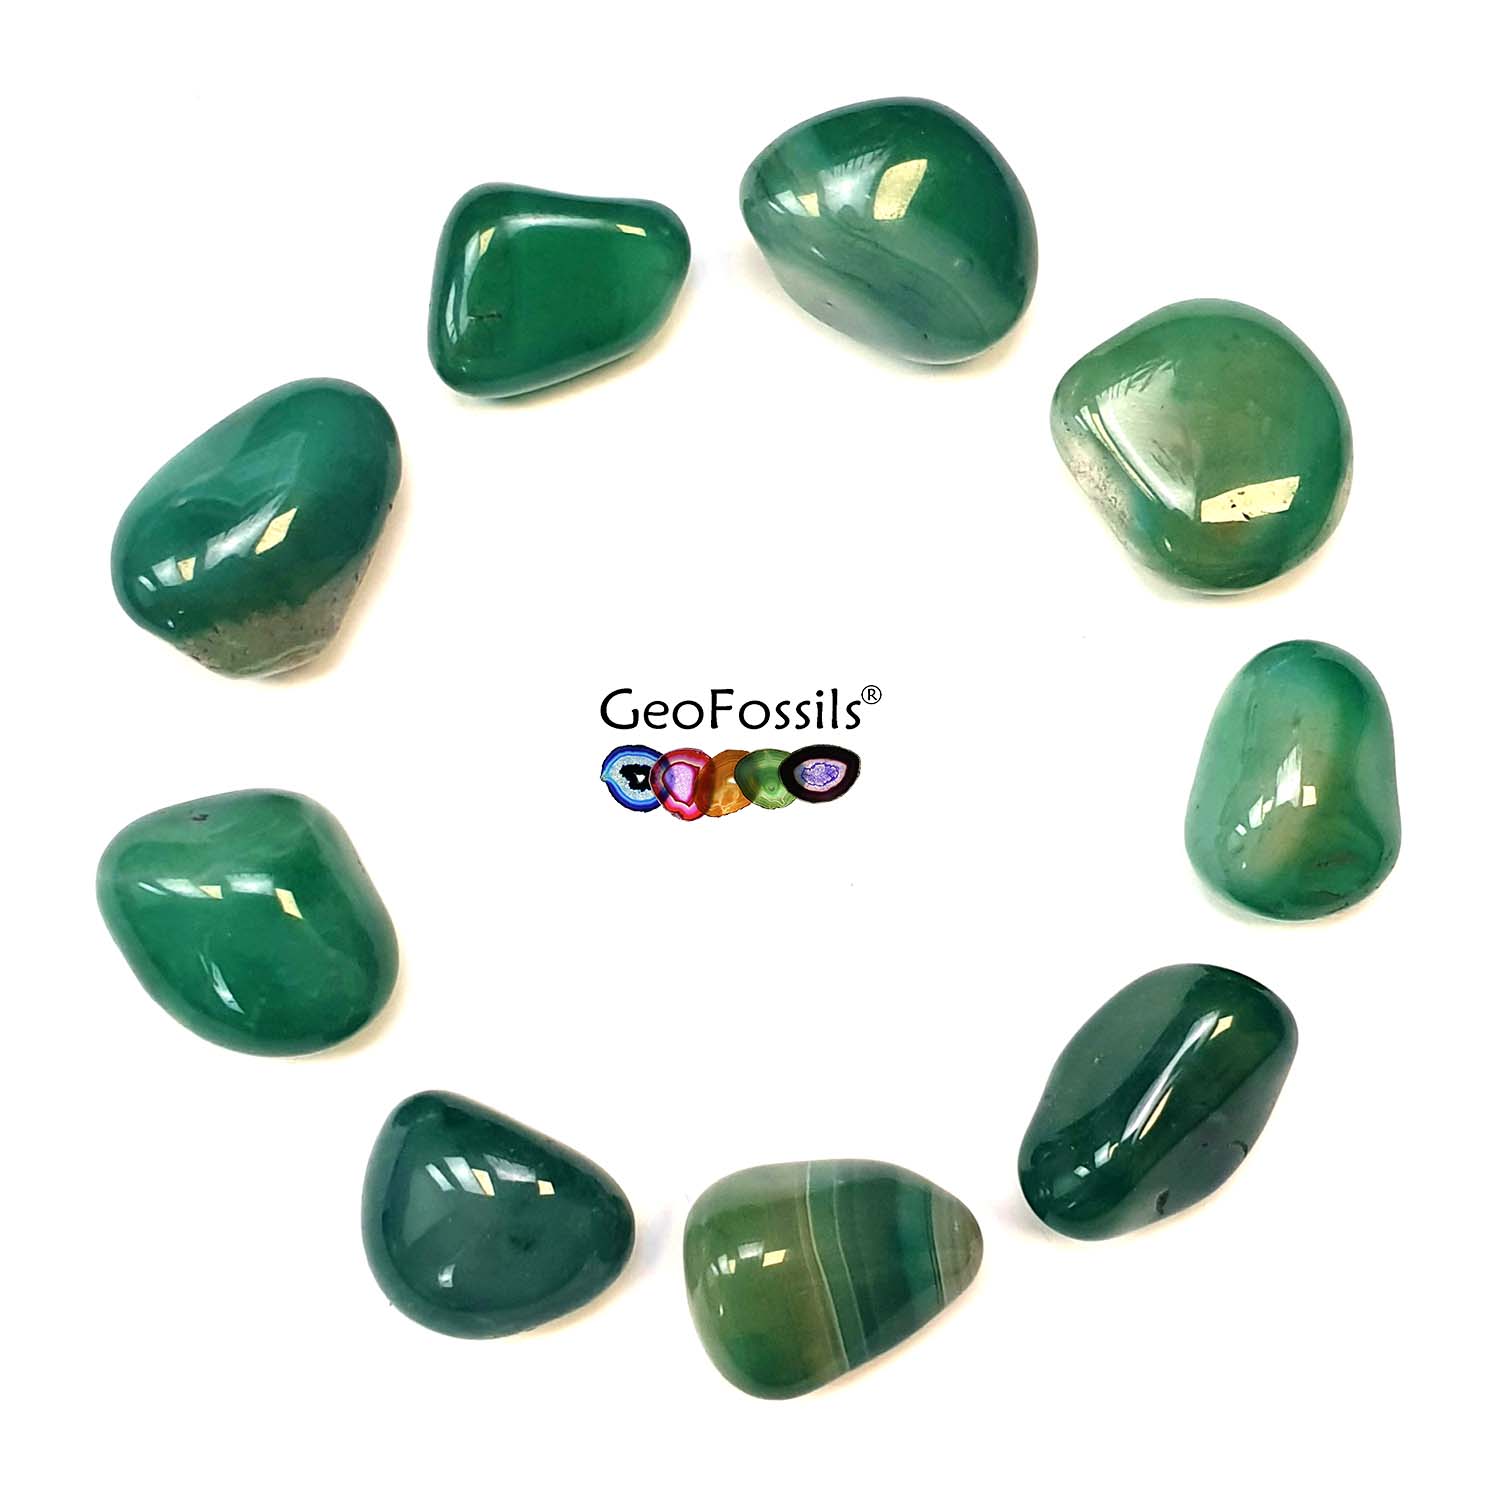 Dyed Green Agate Polished Tumbled Stones